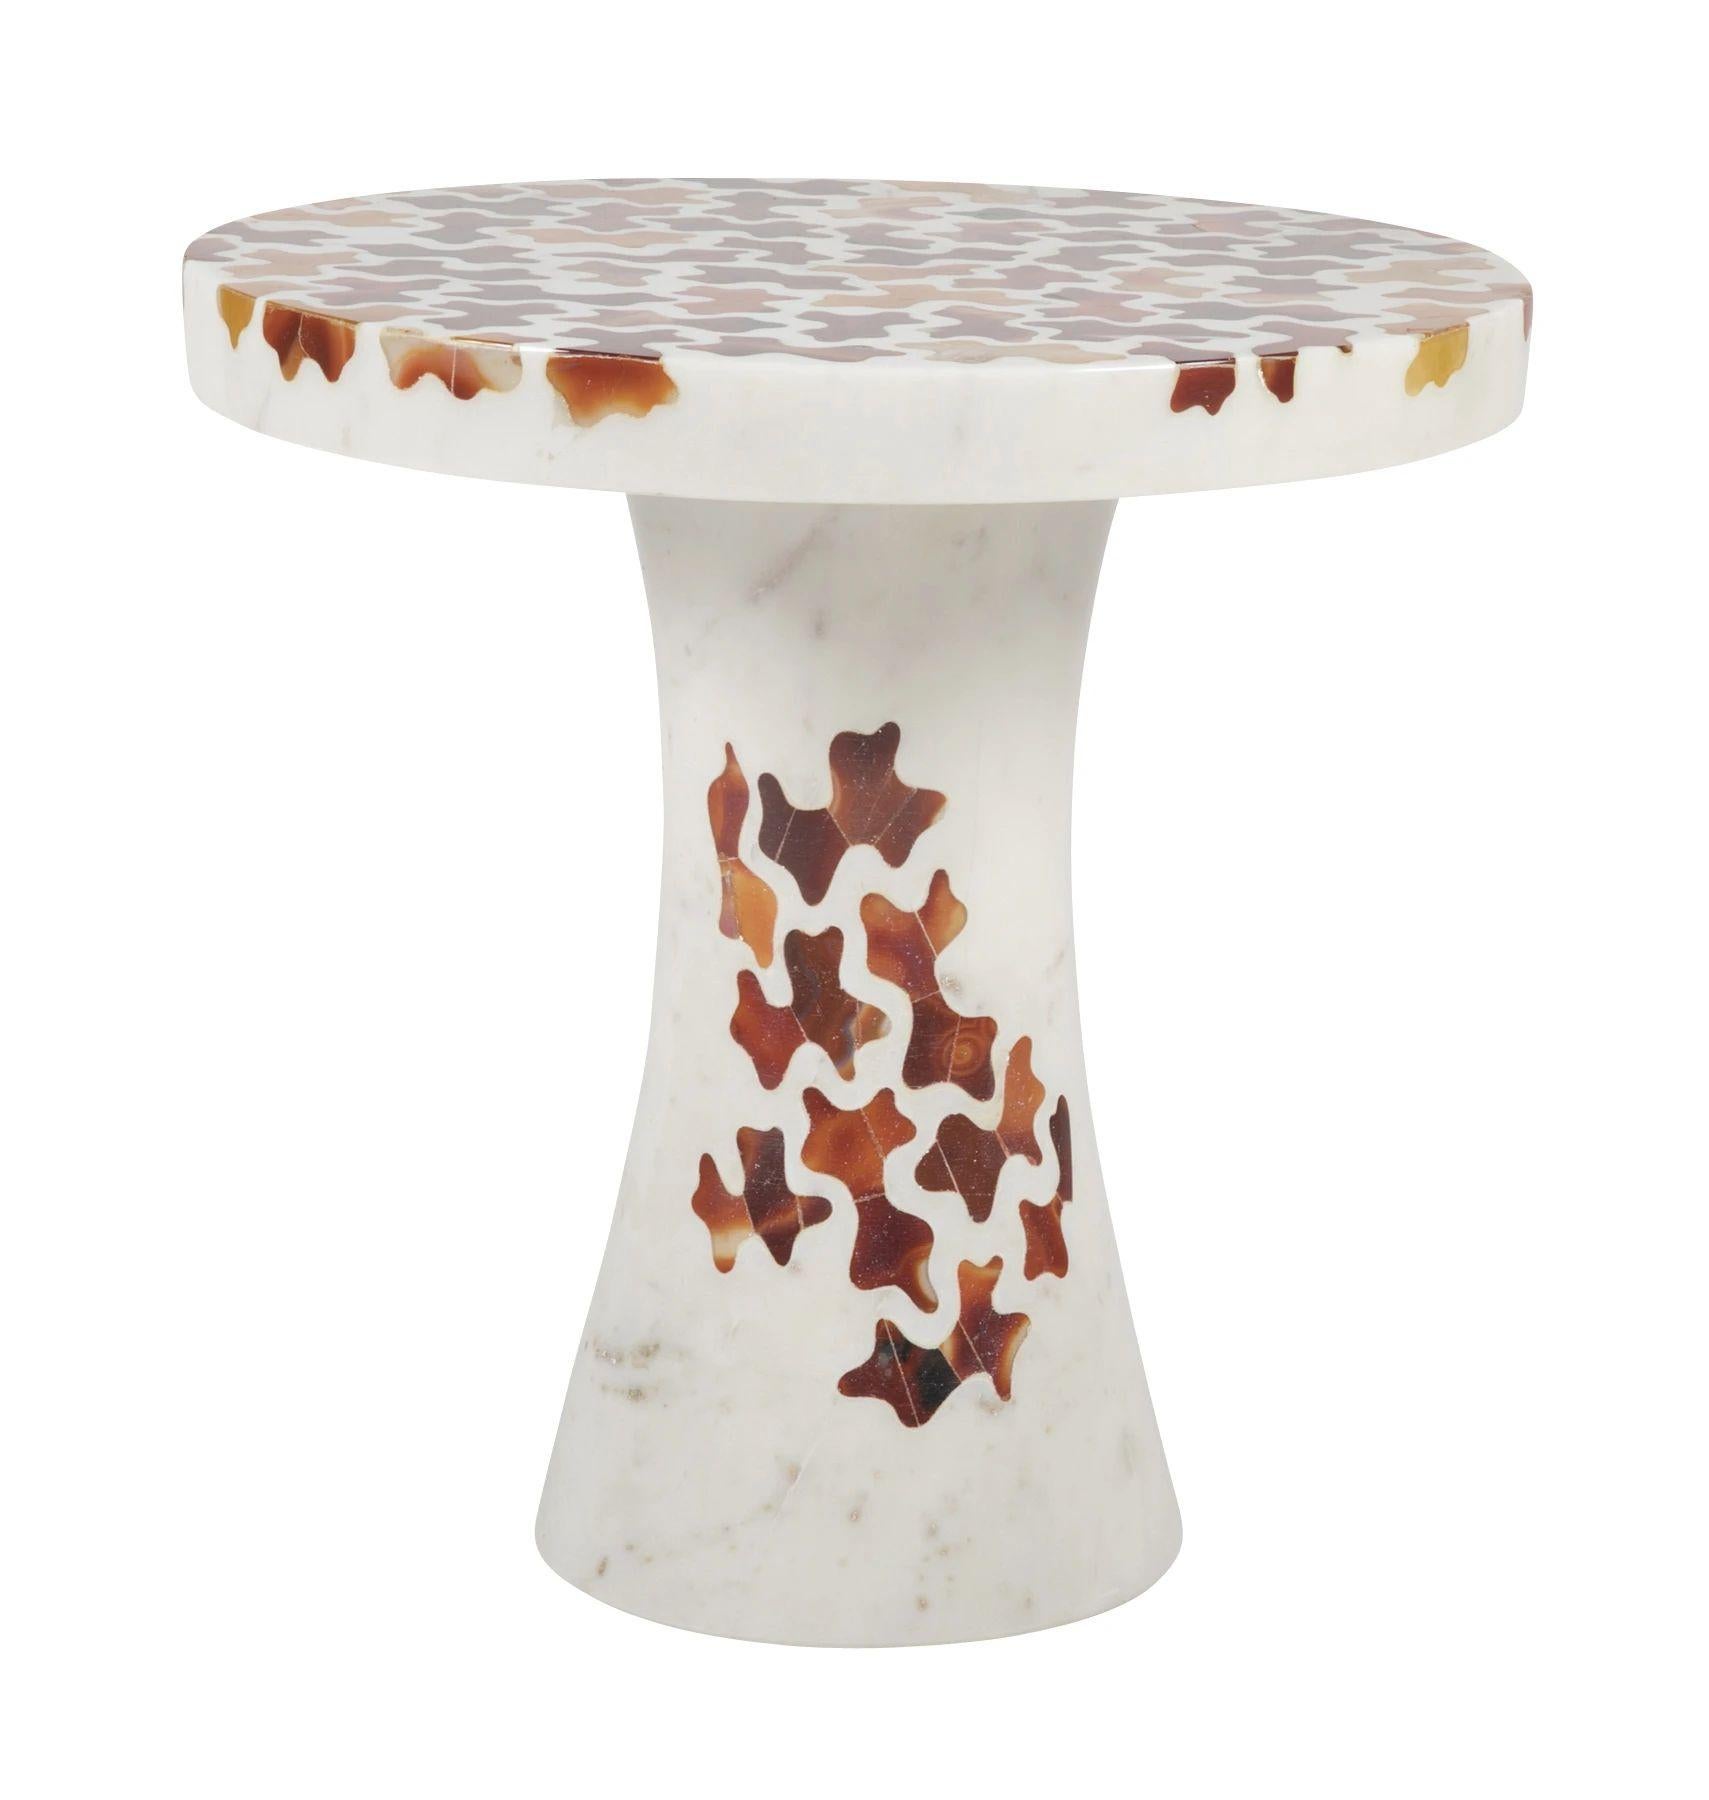 The Agate Jigsaw table is a part of the Ornamenti collection. Delicately cut rare pieces of agate are carefully inlaid into the base stone by our master craftsmen. The collection features modern designs using the Pietra Dura method originated in